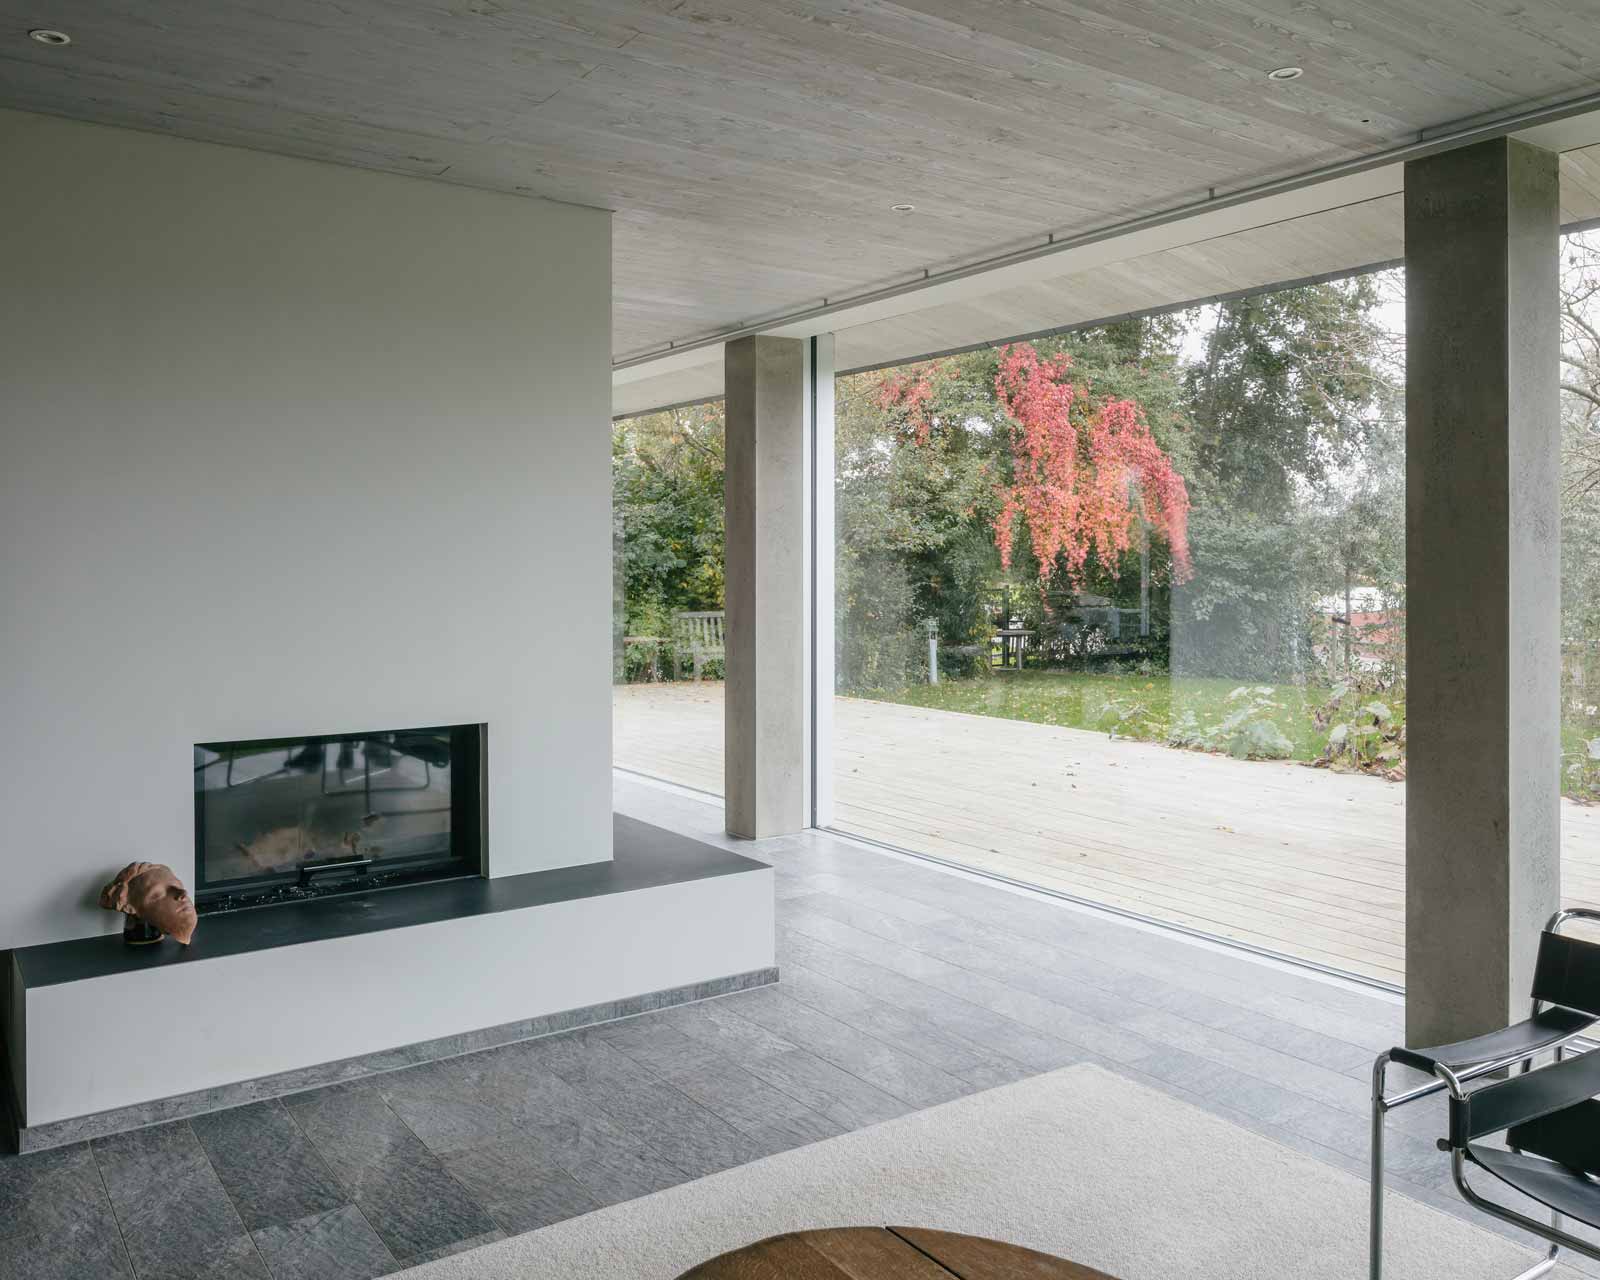 interior photo of house tc showing fireplace and large glass sliding doors by beta architect amsterdam evert klinkenberg gus auguste van oppen image by Stijn Bollaert